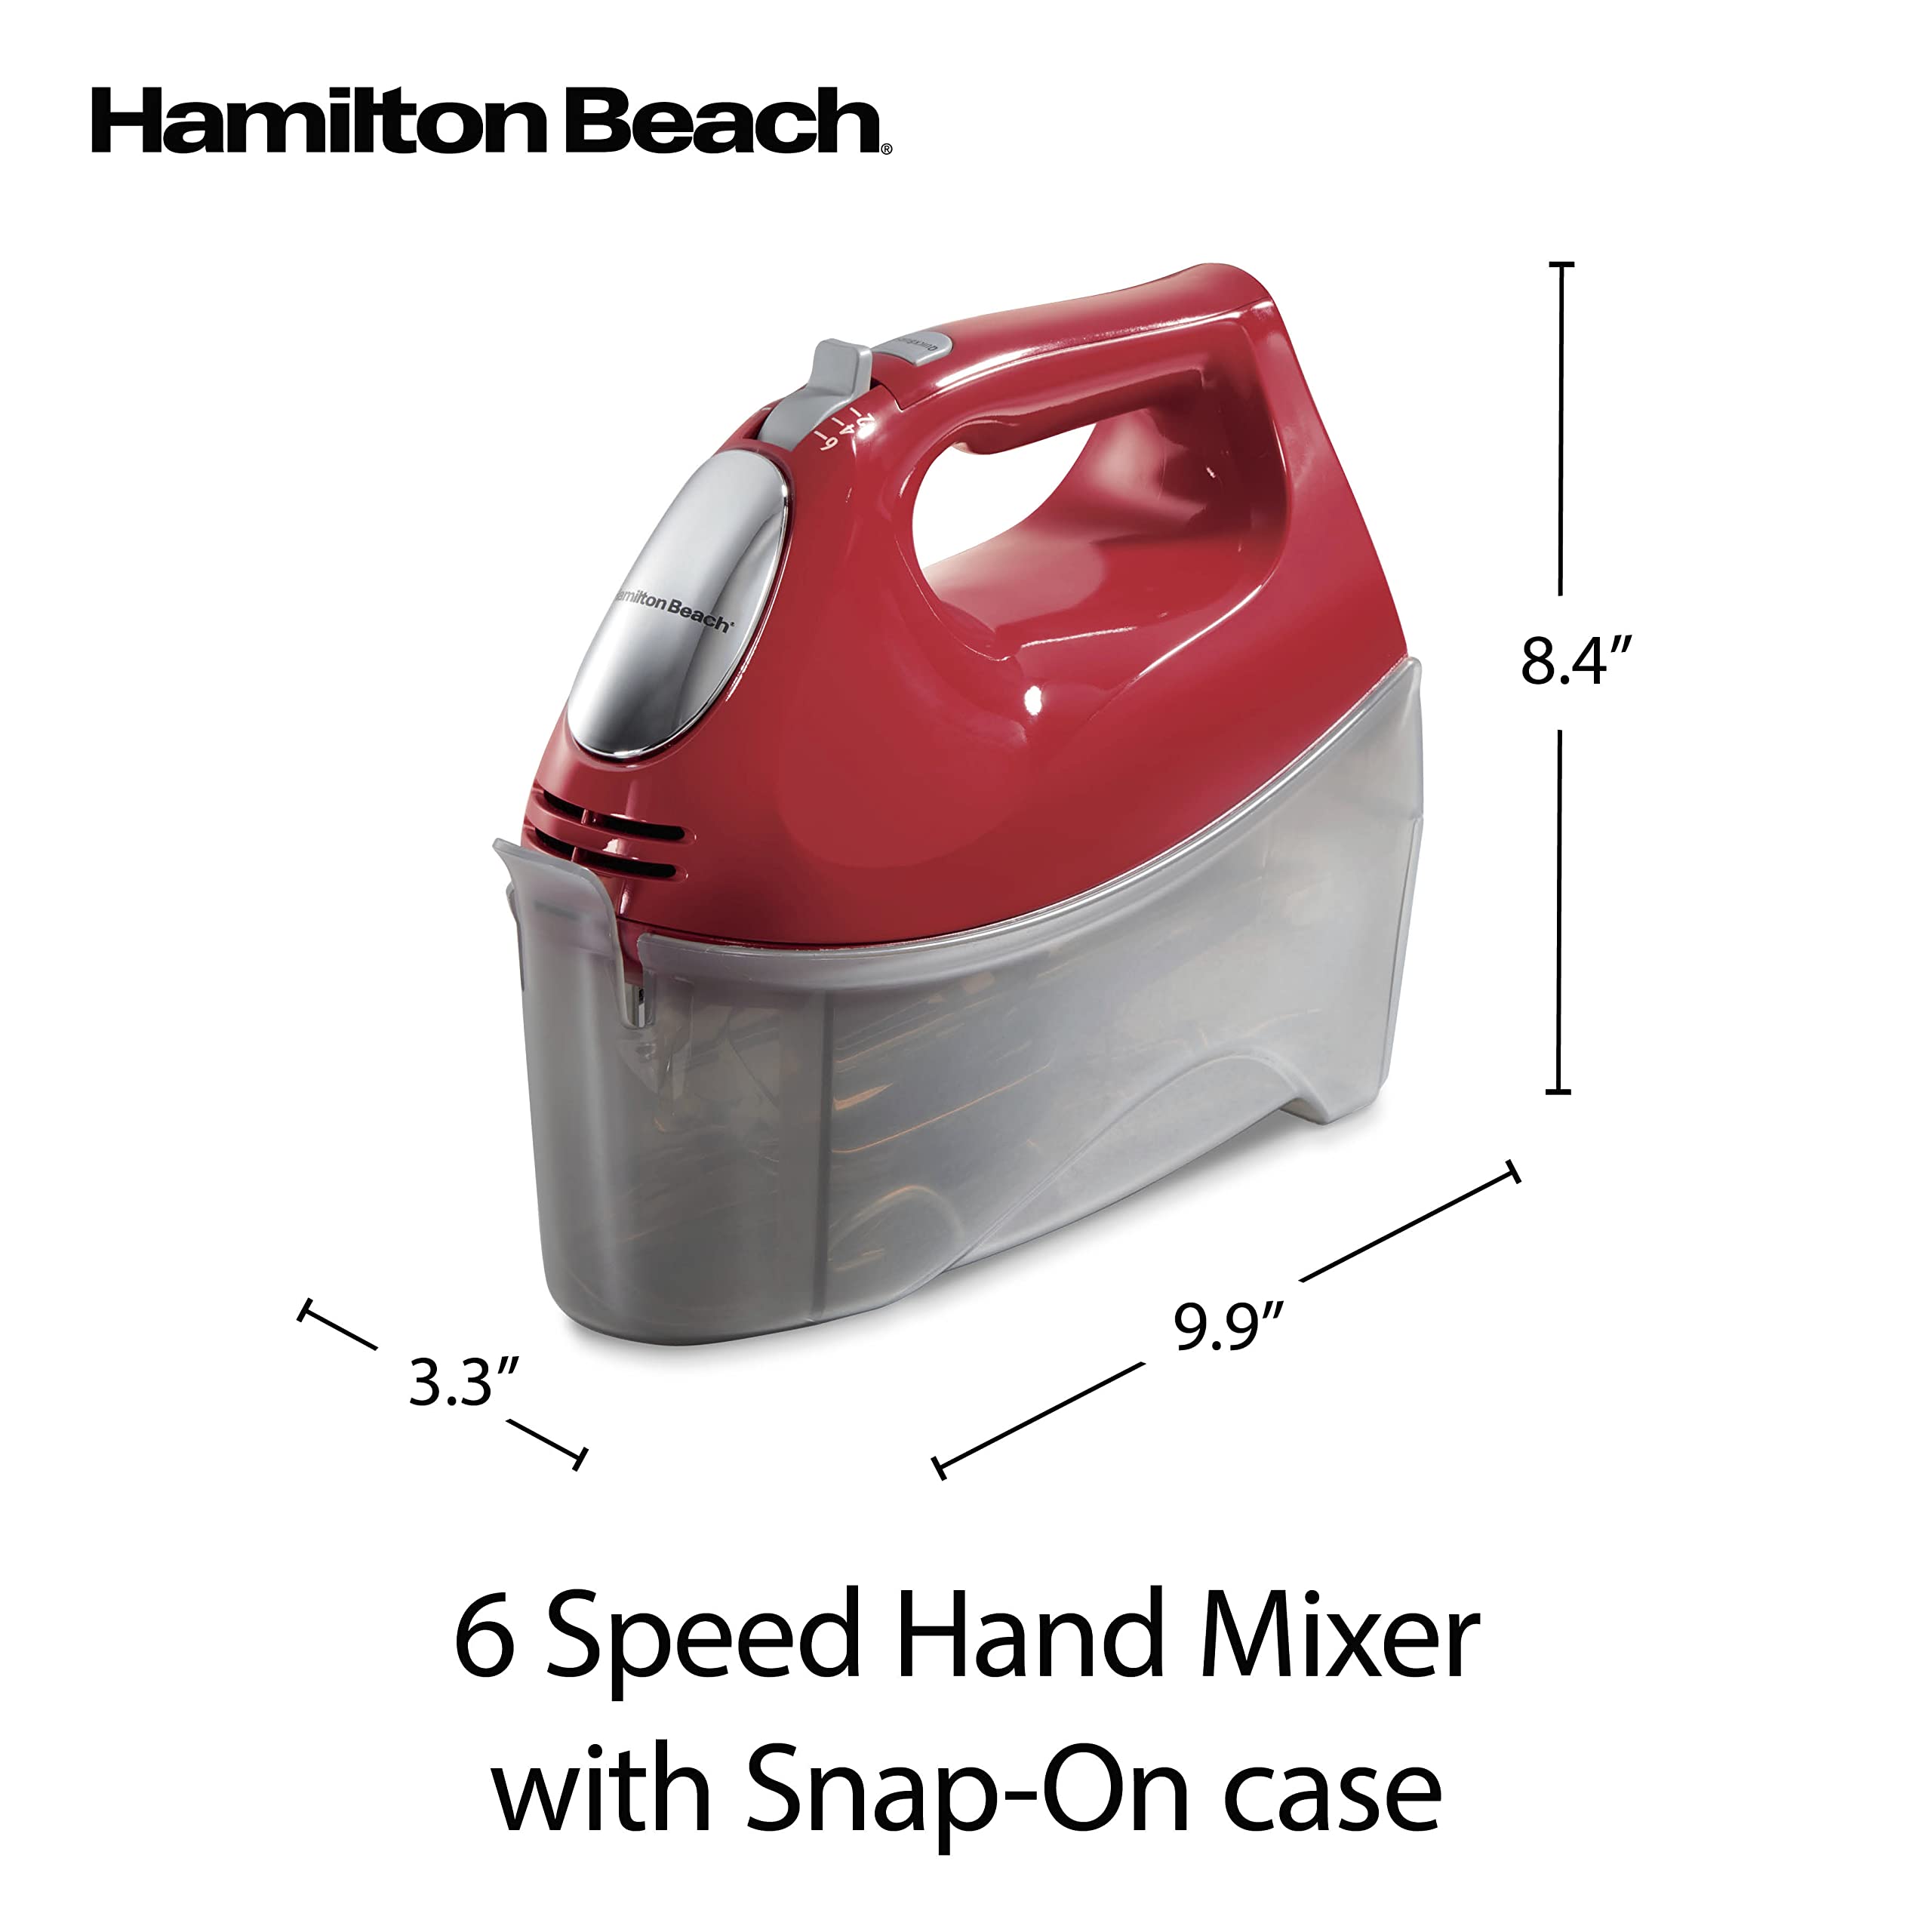 Hamilton Beach 6-Speed Electric Hand Mixer with Whisk, Traditional Beaters, Snap-On Storage Case, Dough Hooks, Red